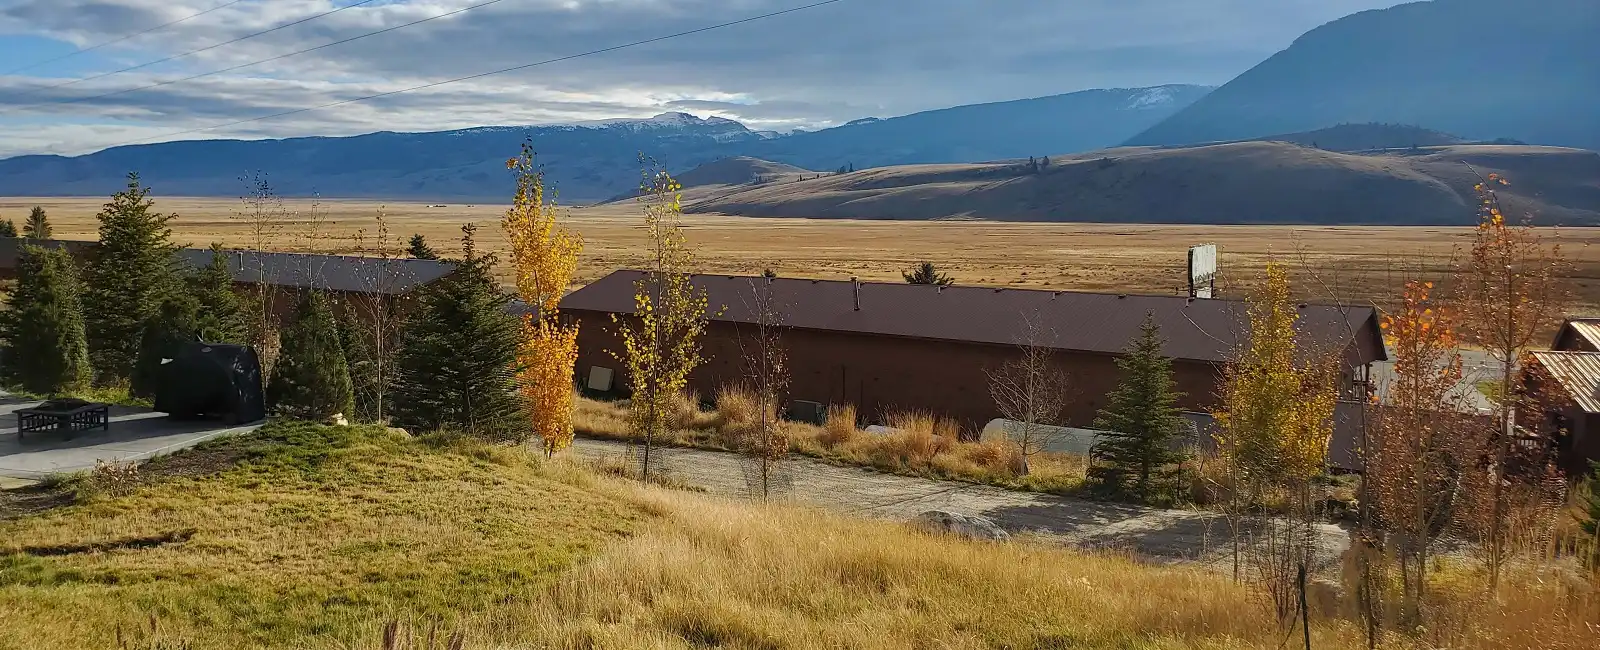 The National Elk Refuge and the Sleeping Indian mountain formation can be seen from Elk Ridge Estate, a Jackson Hole luxury vacation rental.